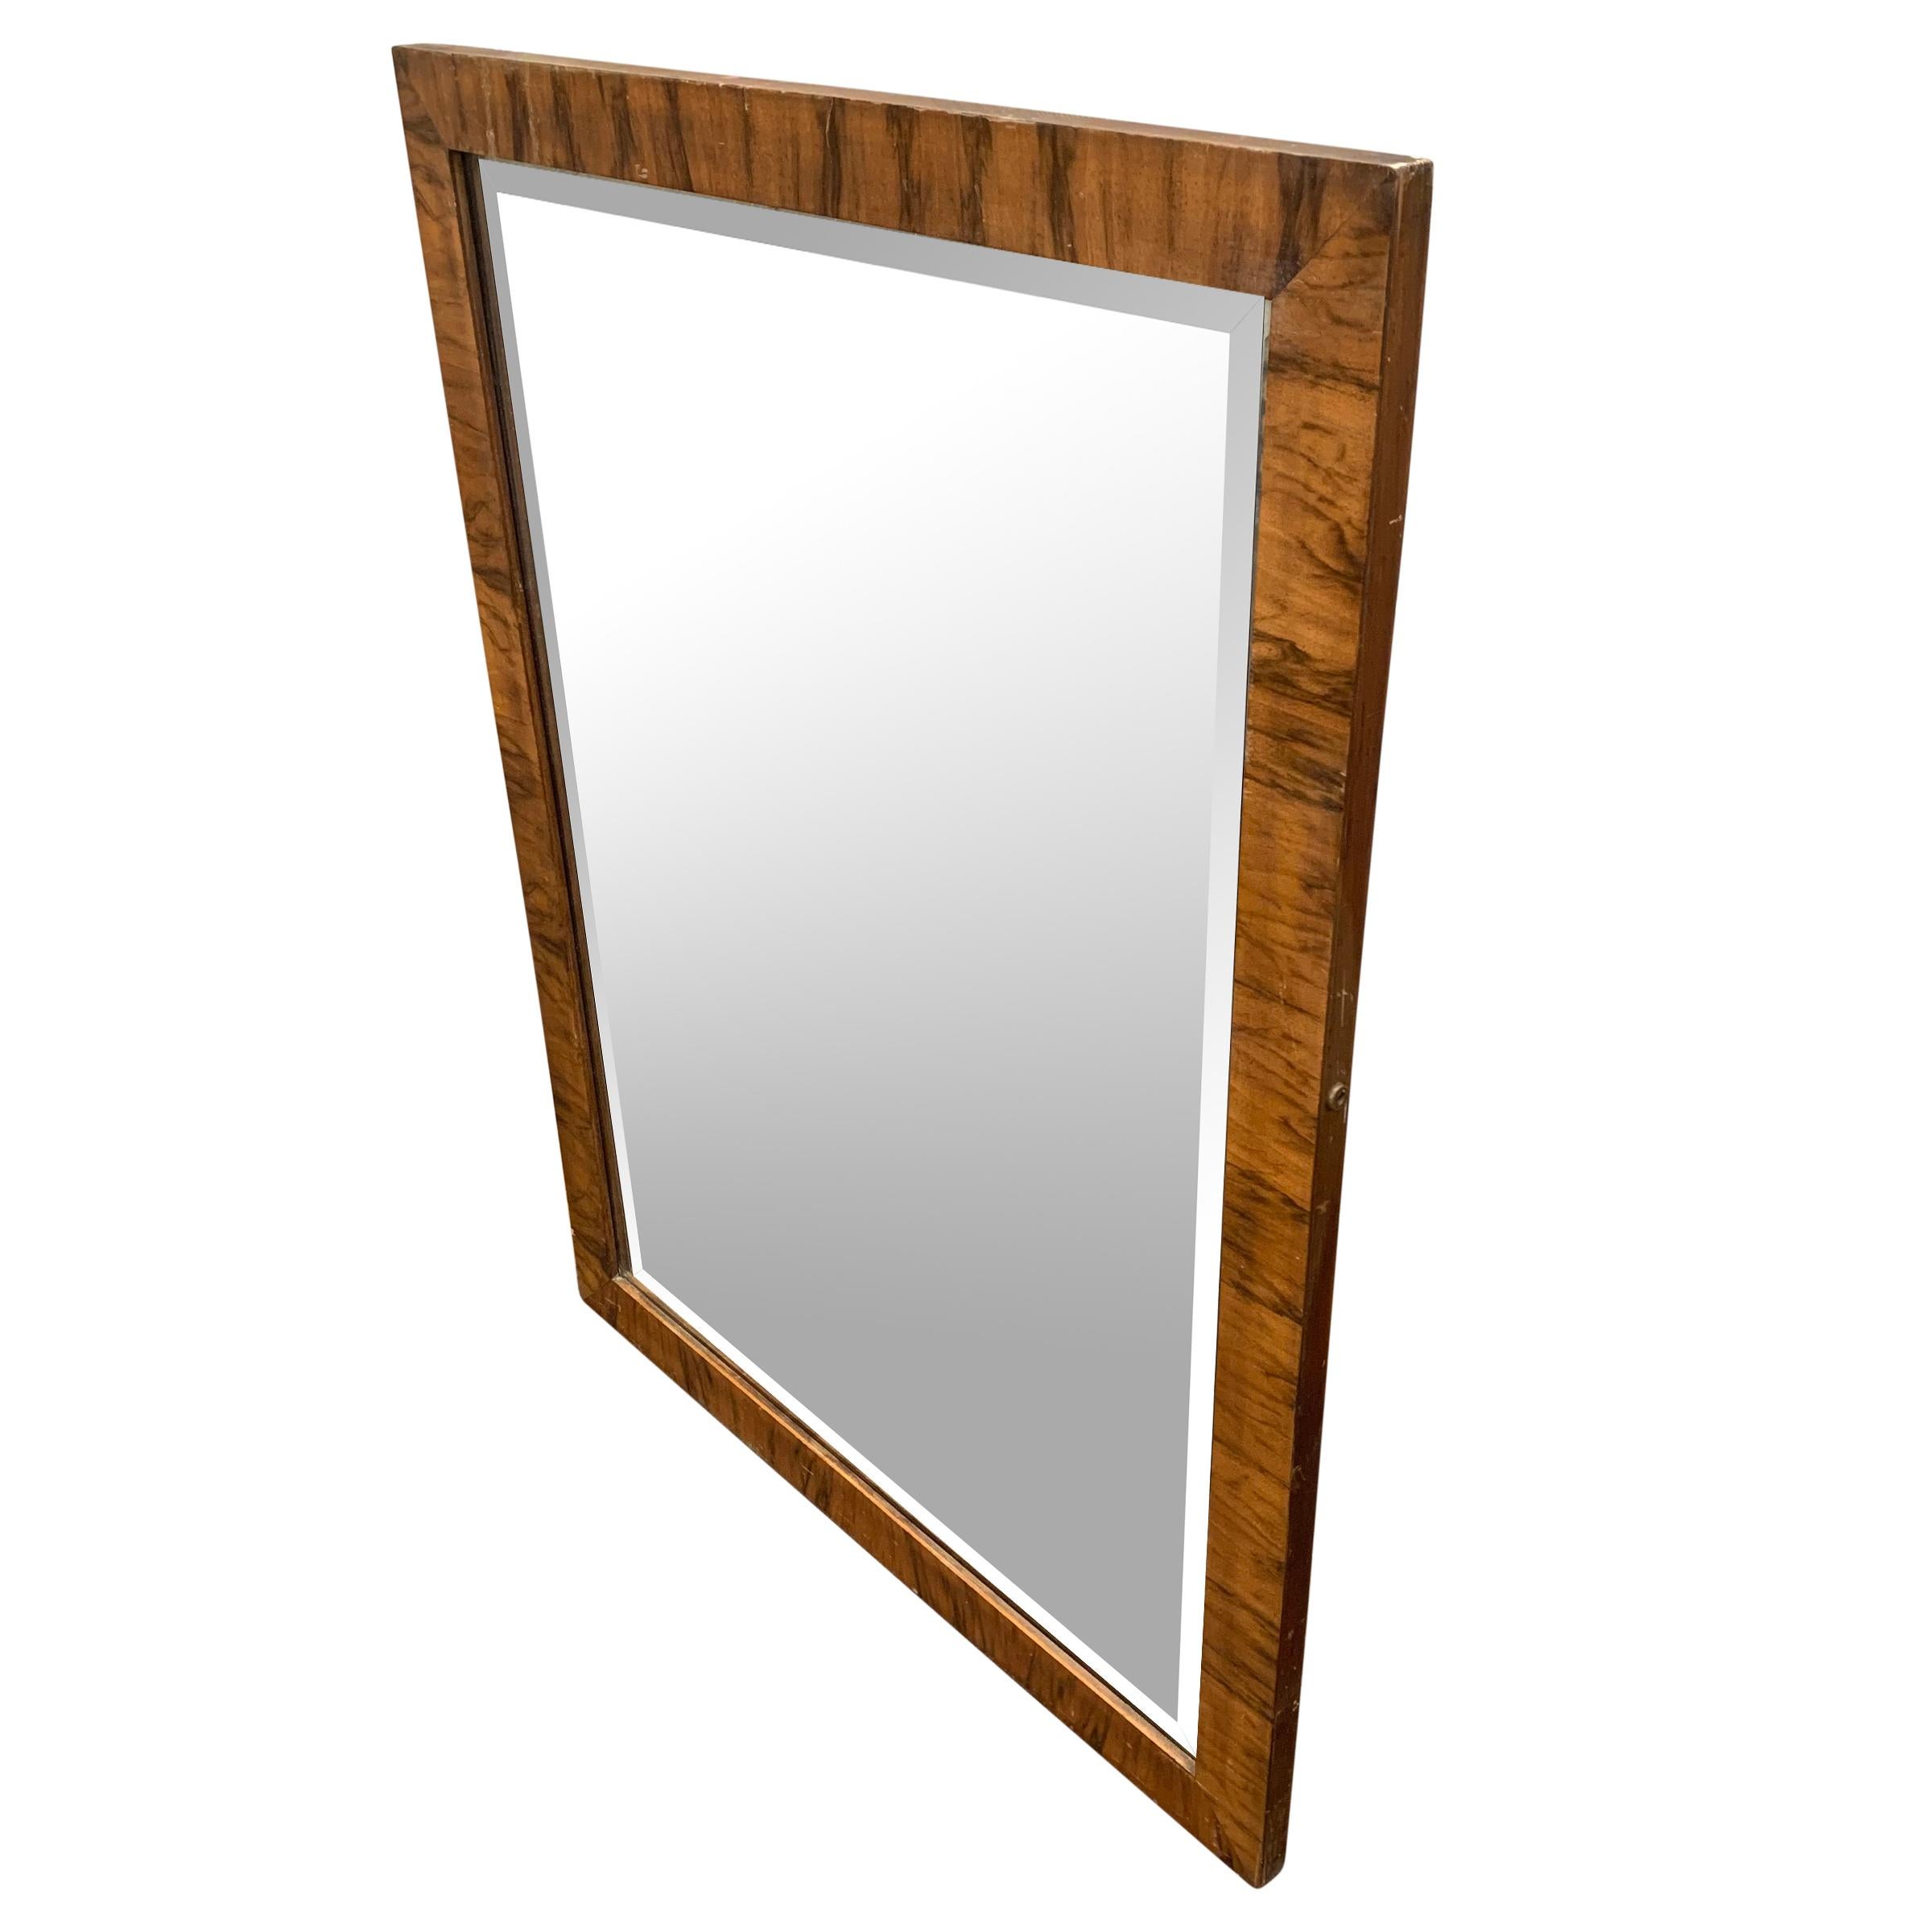 A wonderful early 20th century American Art Deco mirror with a beautiful bookmatched crotch rosewood veneer and it's original beveled glass.